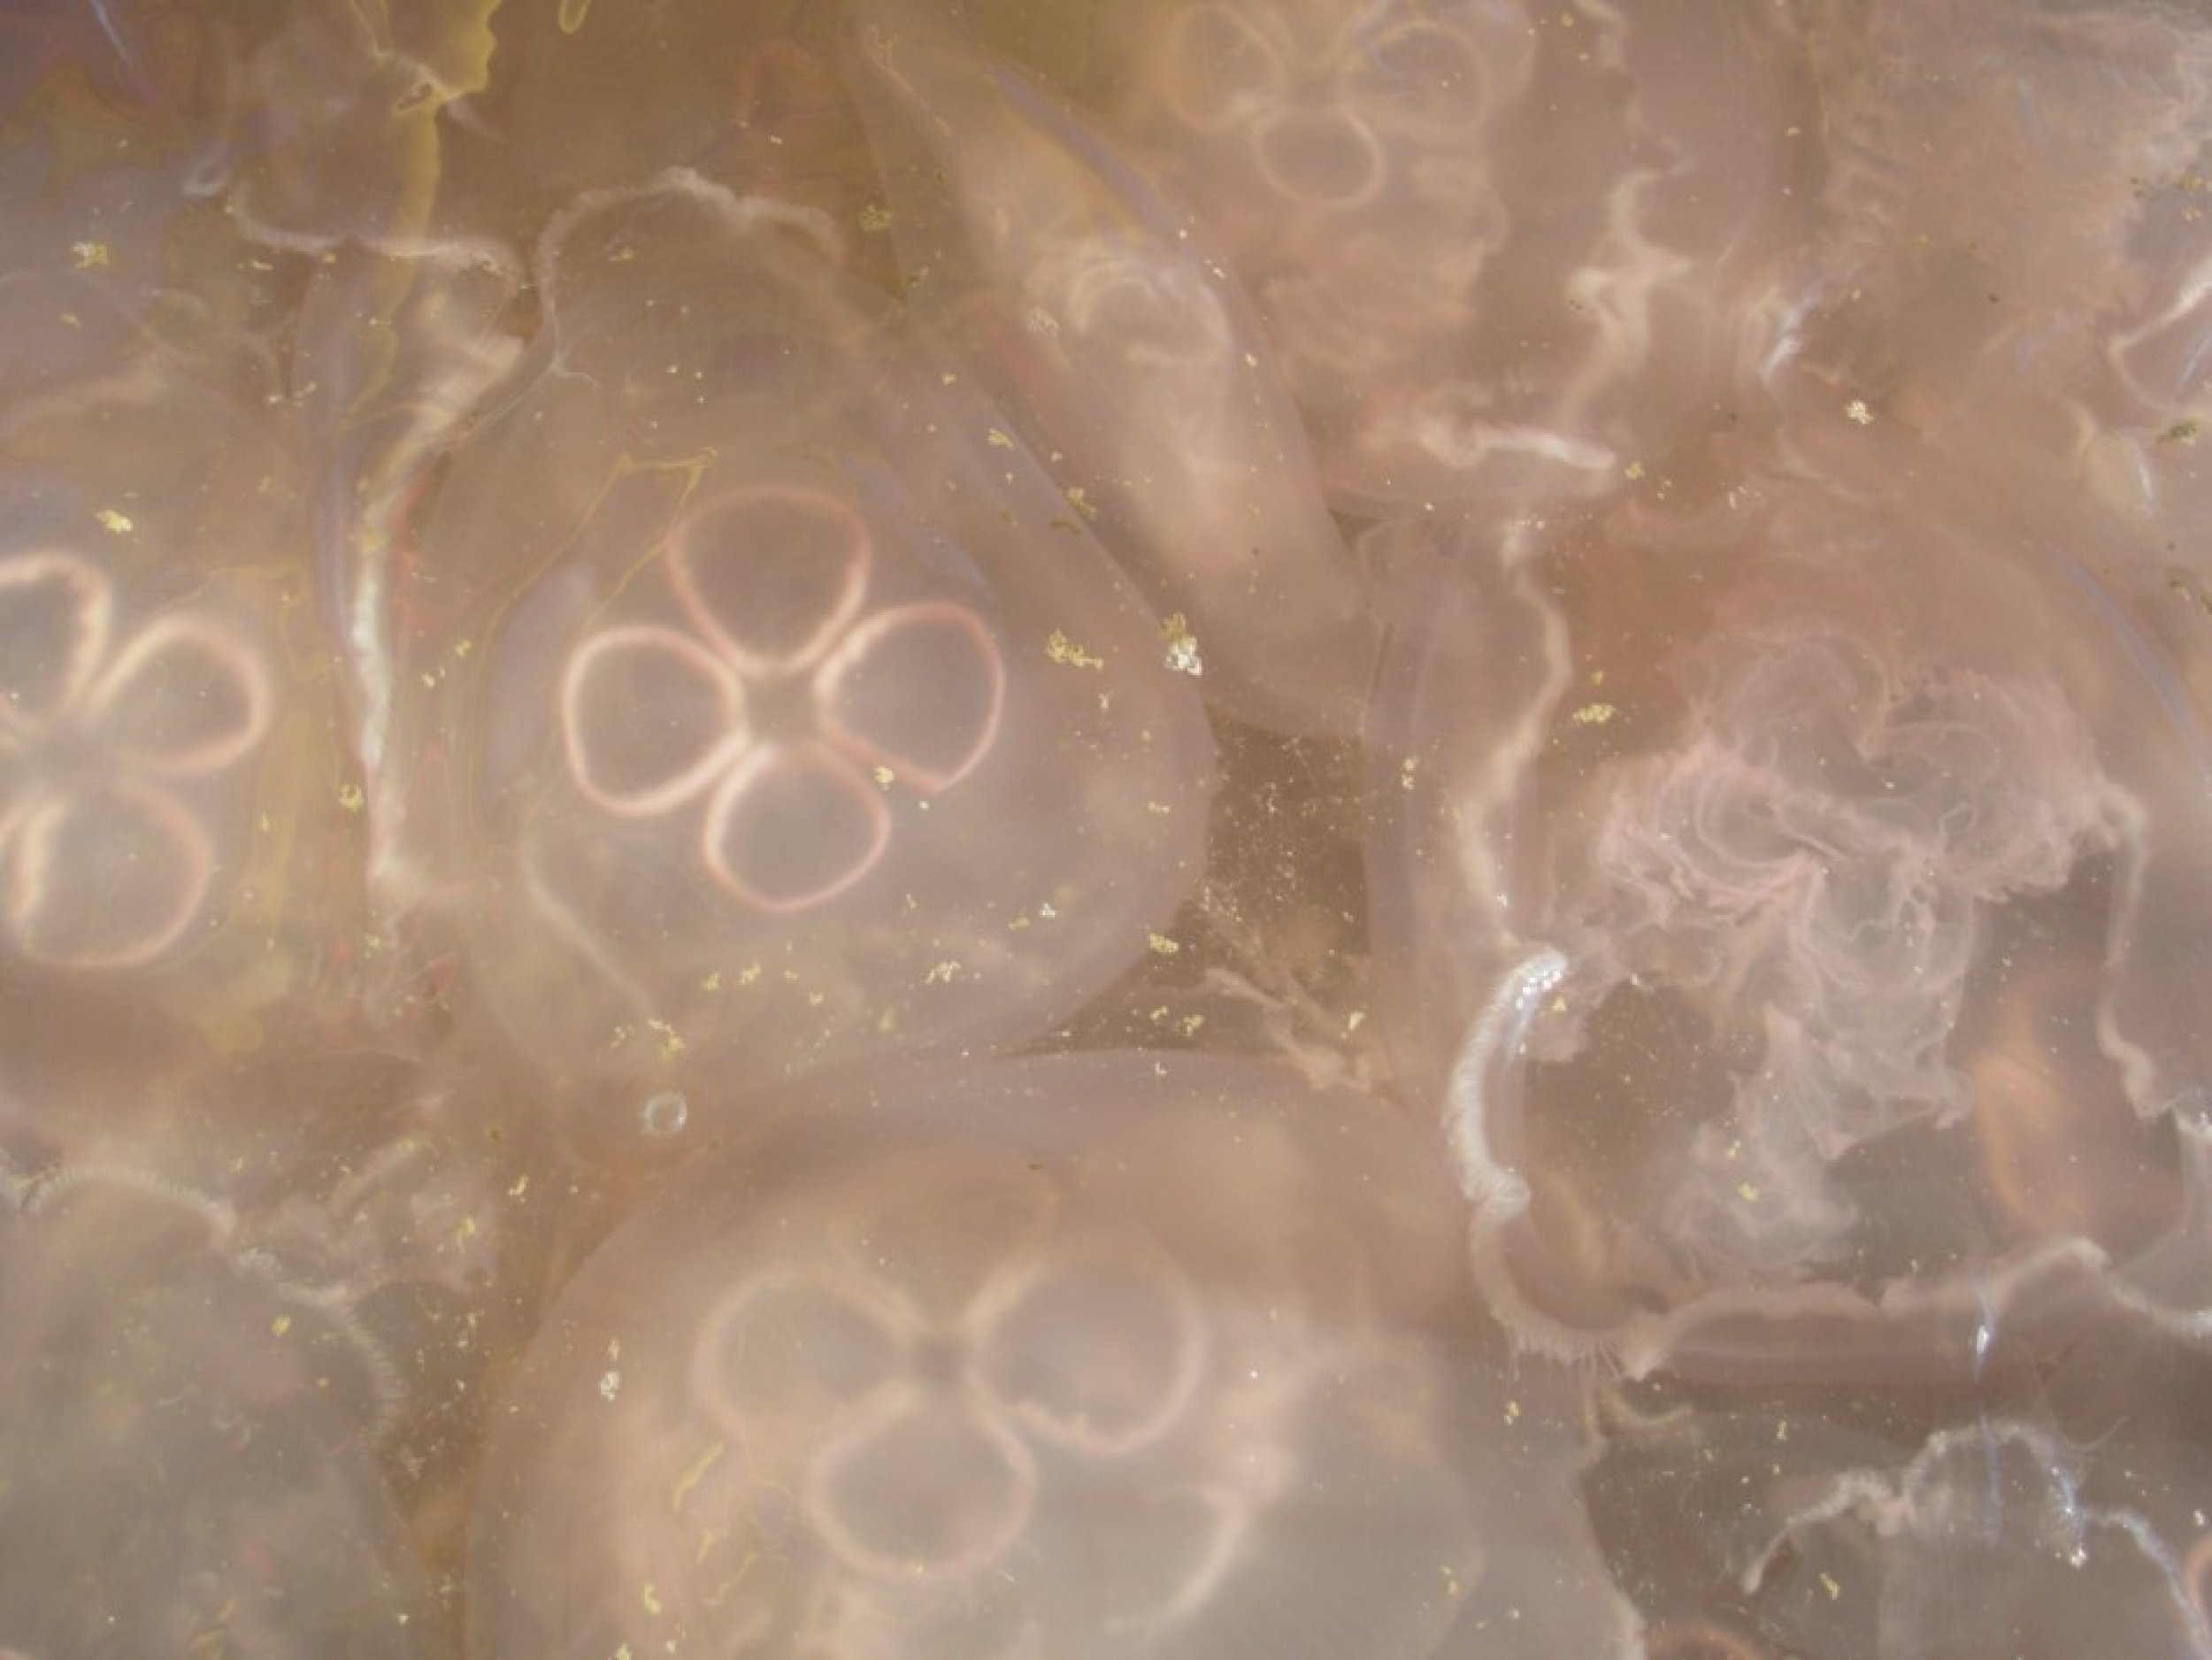 Four nuclear reactors in Japan, Israel and Scotland were forced to shutdown due to infiltration of enormous swarms of jellyfish, which clogged the seawater cooling system of the plants.